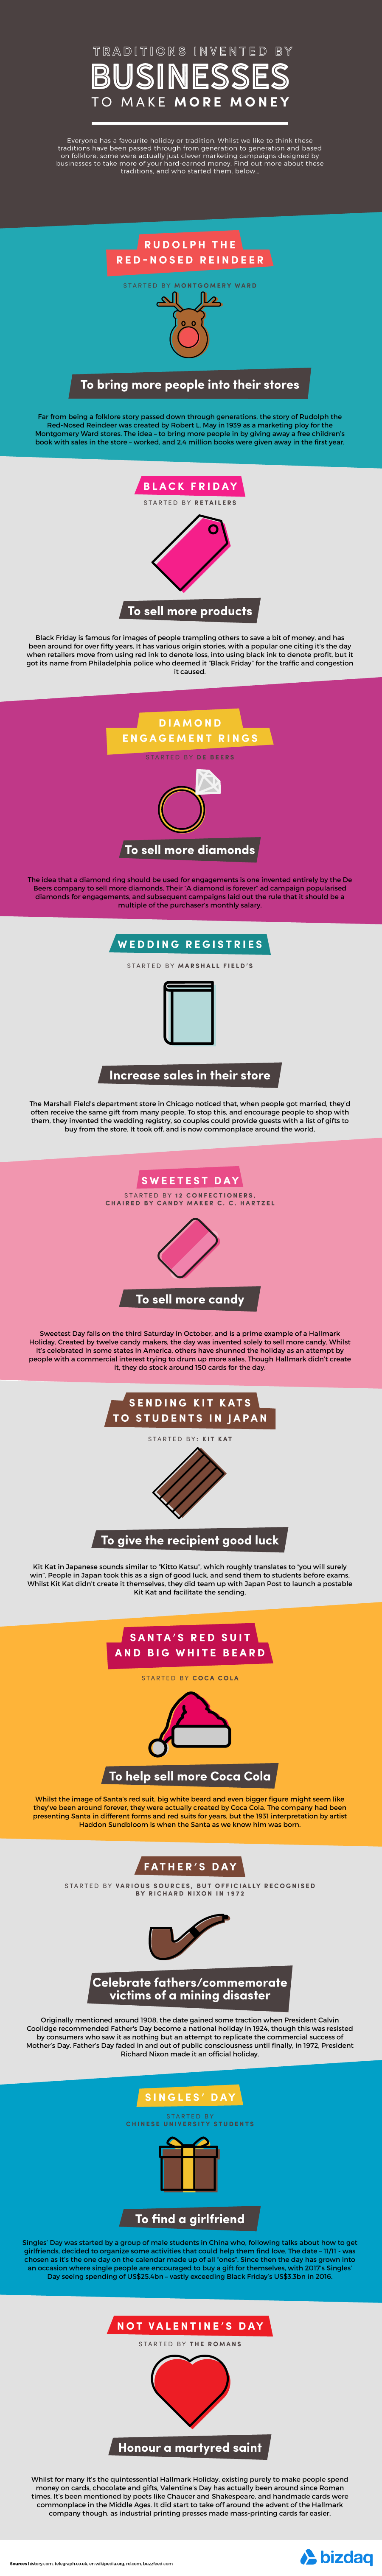 Traditions Invented by Businesses to Make More Money- #infographic